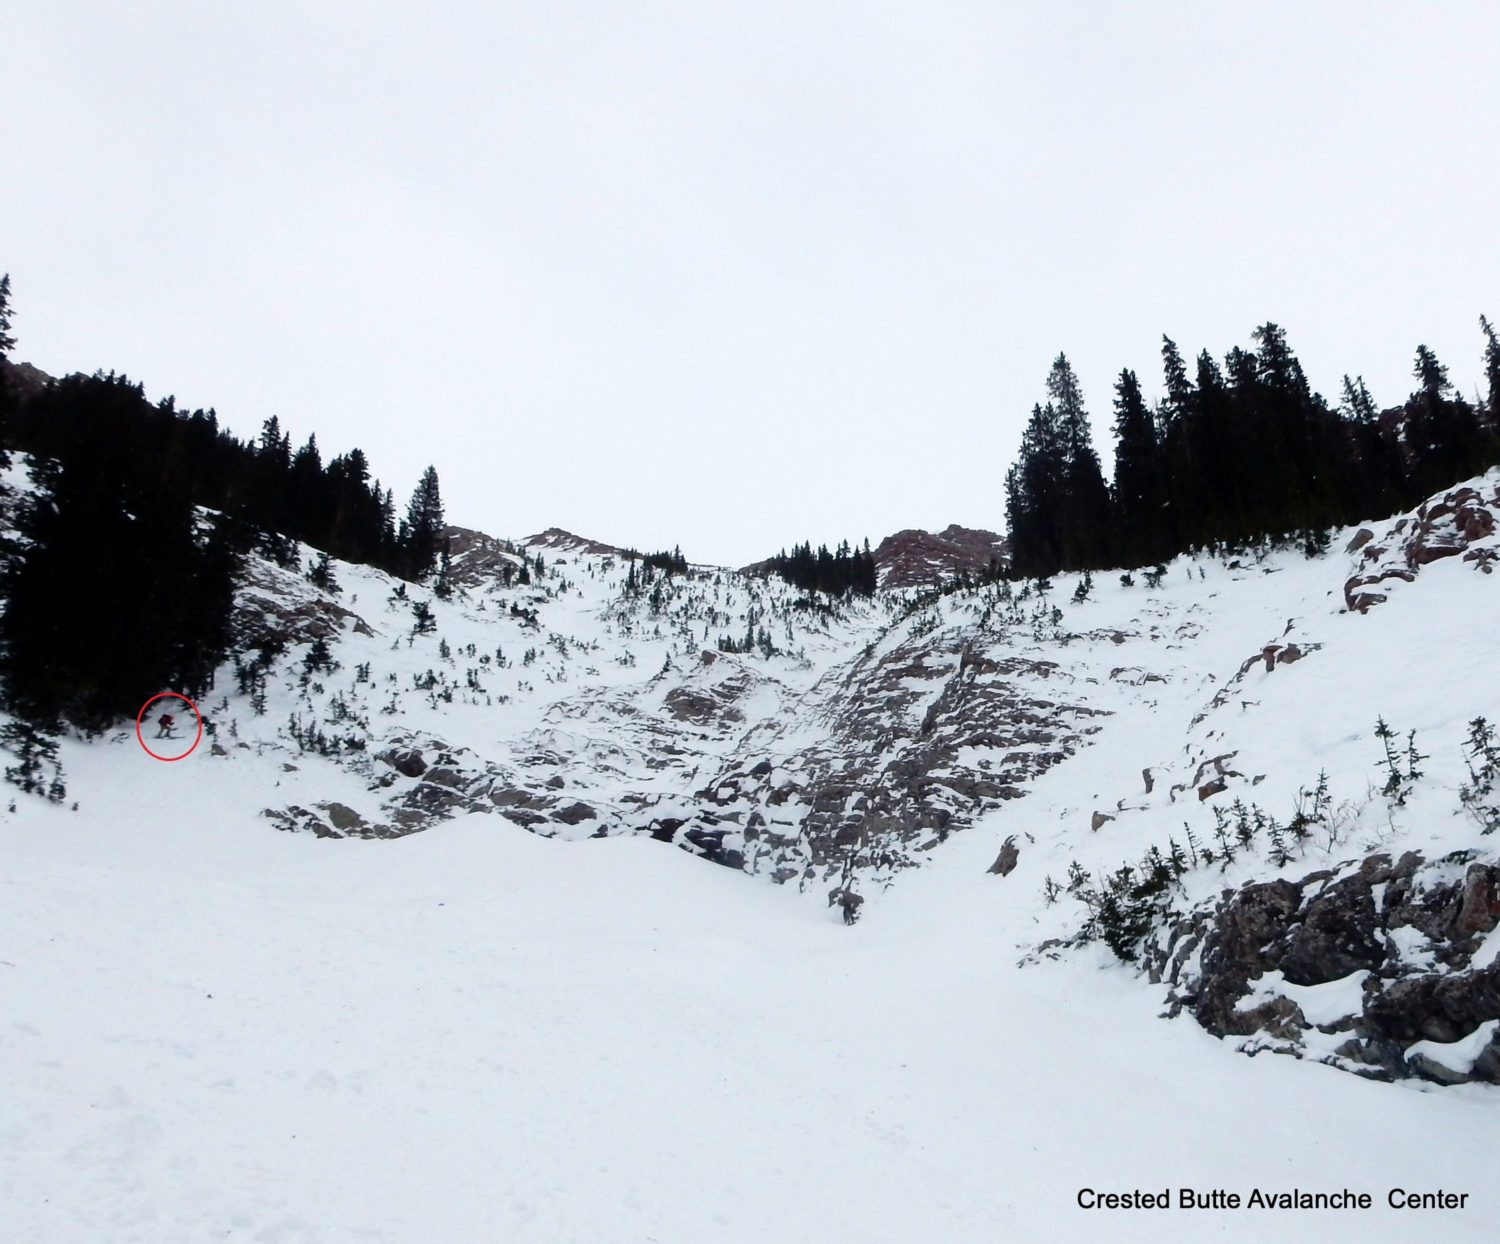 The slide and skier were carried over a cliff band. Skier circled in red for scale. Image: Crested Butte Avalanche Center